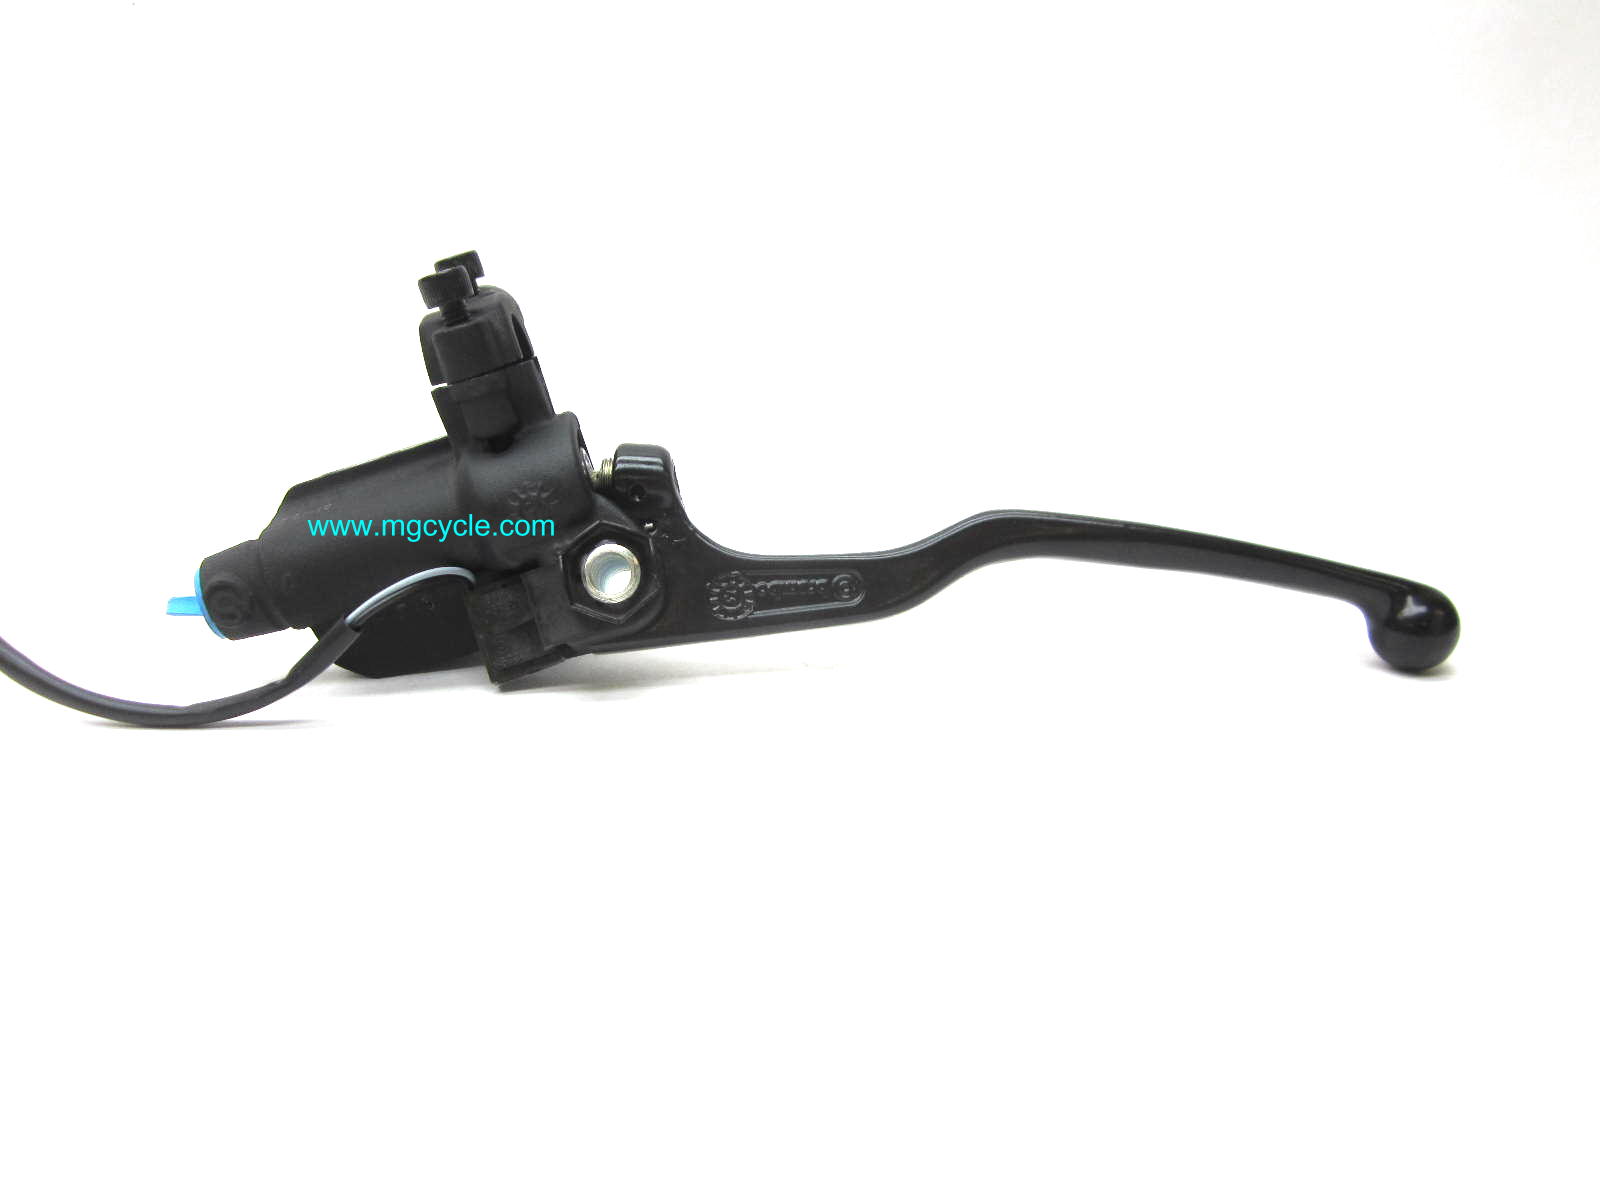 Brembo 15mm master cylinder, black lever, with switch & wires